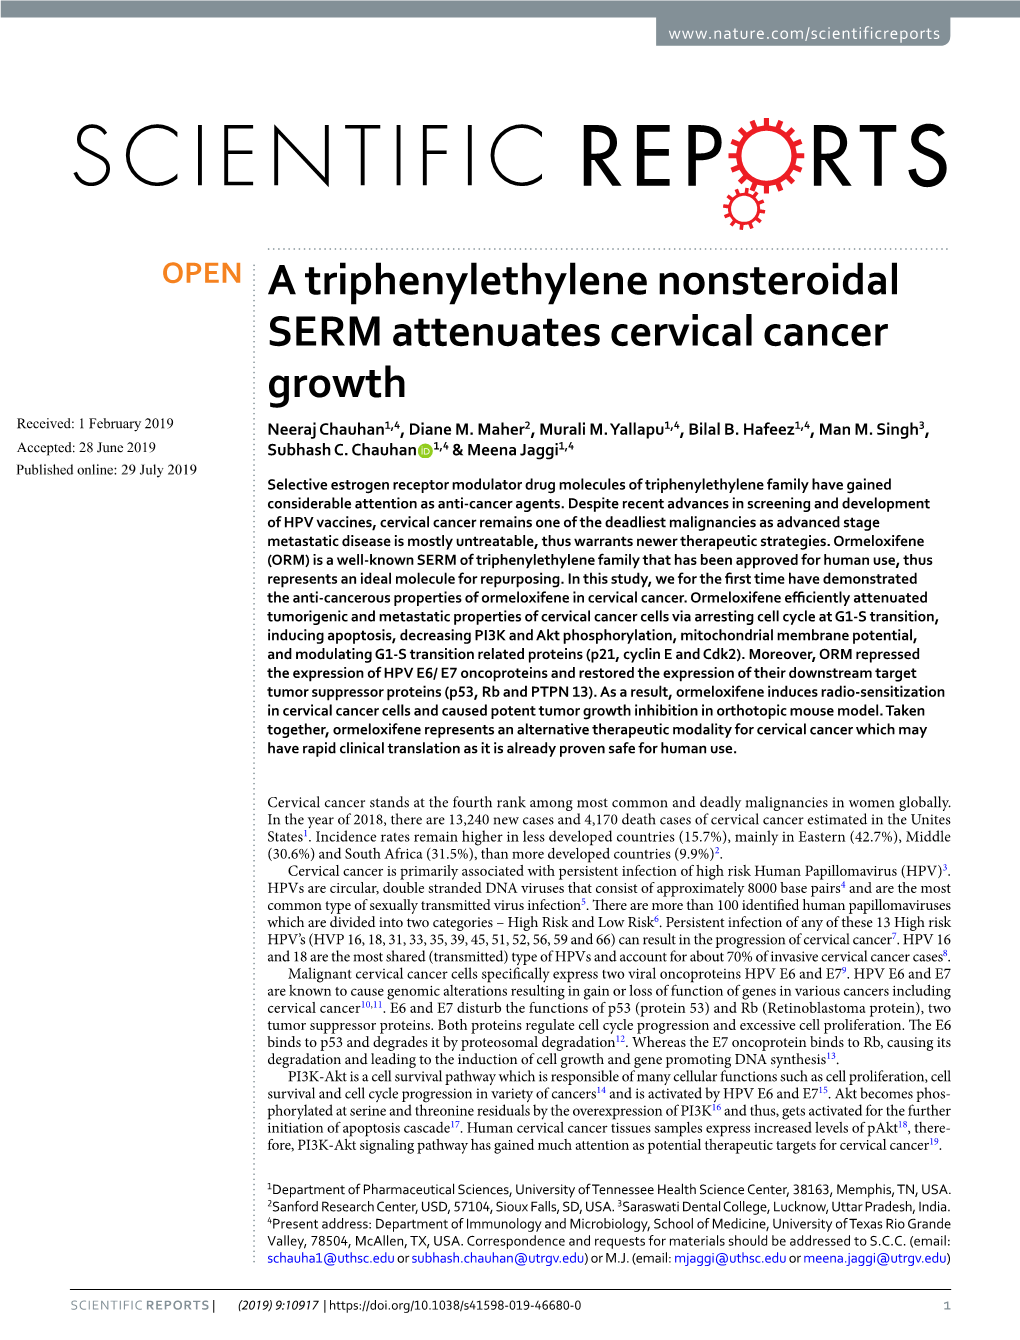 A Triphenylethylene Nonsteroidal SERM Attenuates Cervical Cancer Growth Received: 1 February 2019 Neeraj Chauhan1,4, Diane M